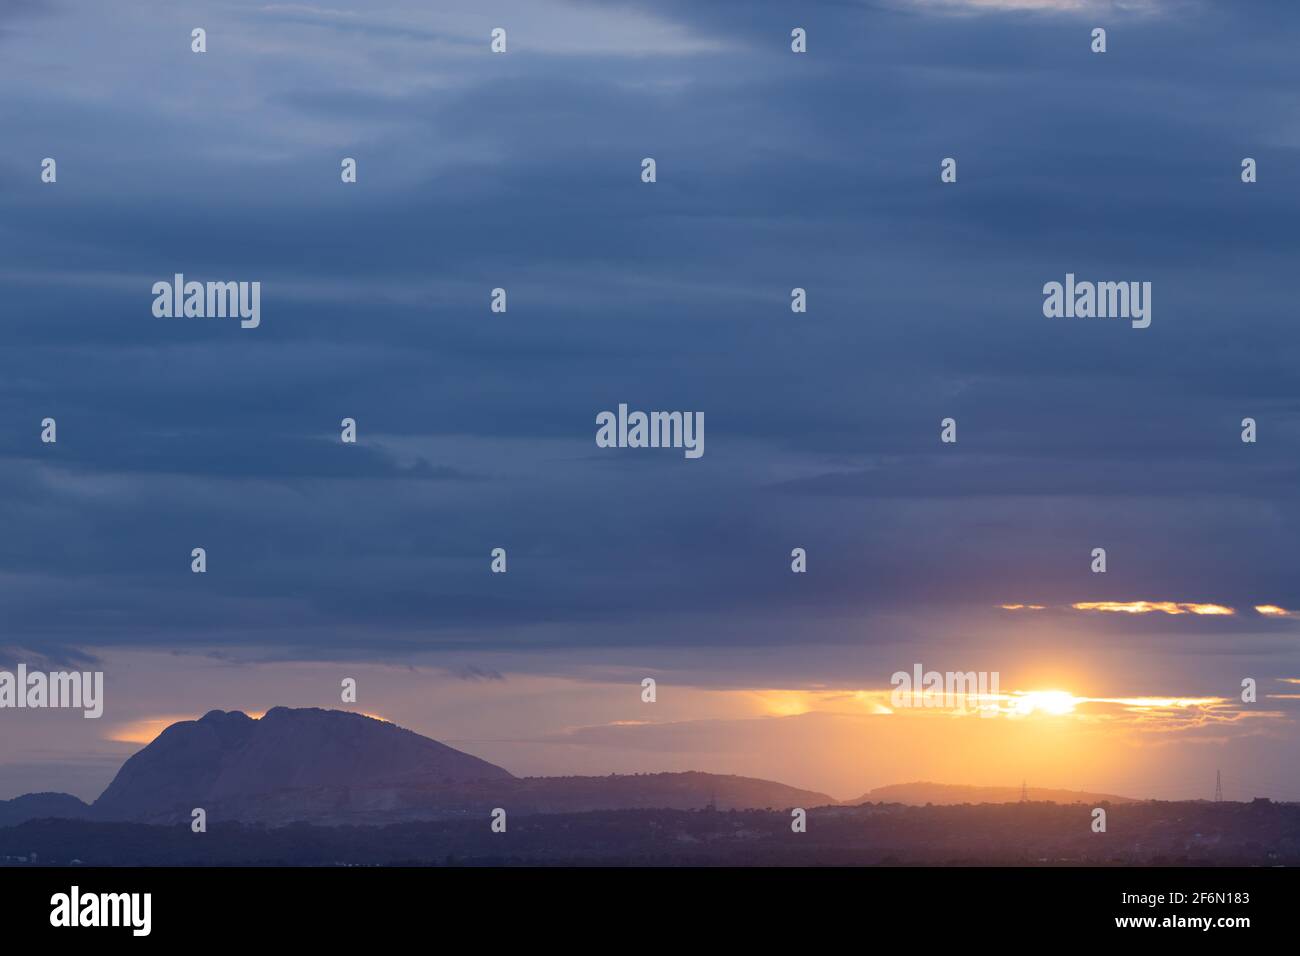 A Panoramic Landscape Silhouette of hills at the bottom with dark clouds in the horizon with sun peeping through them Stock Photo